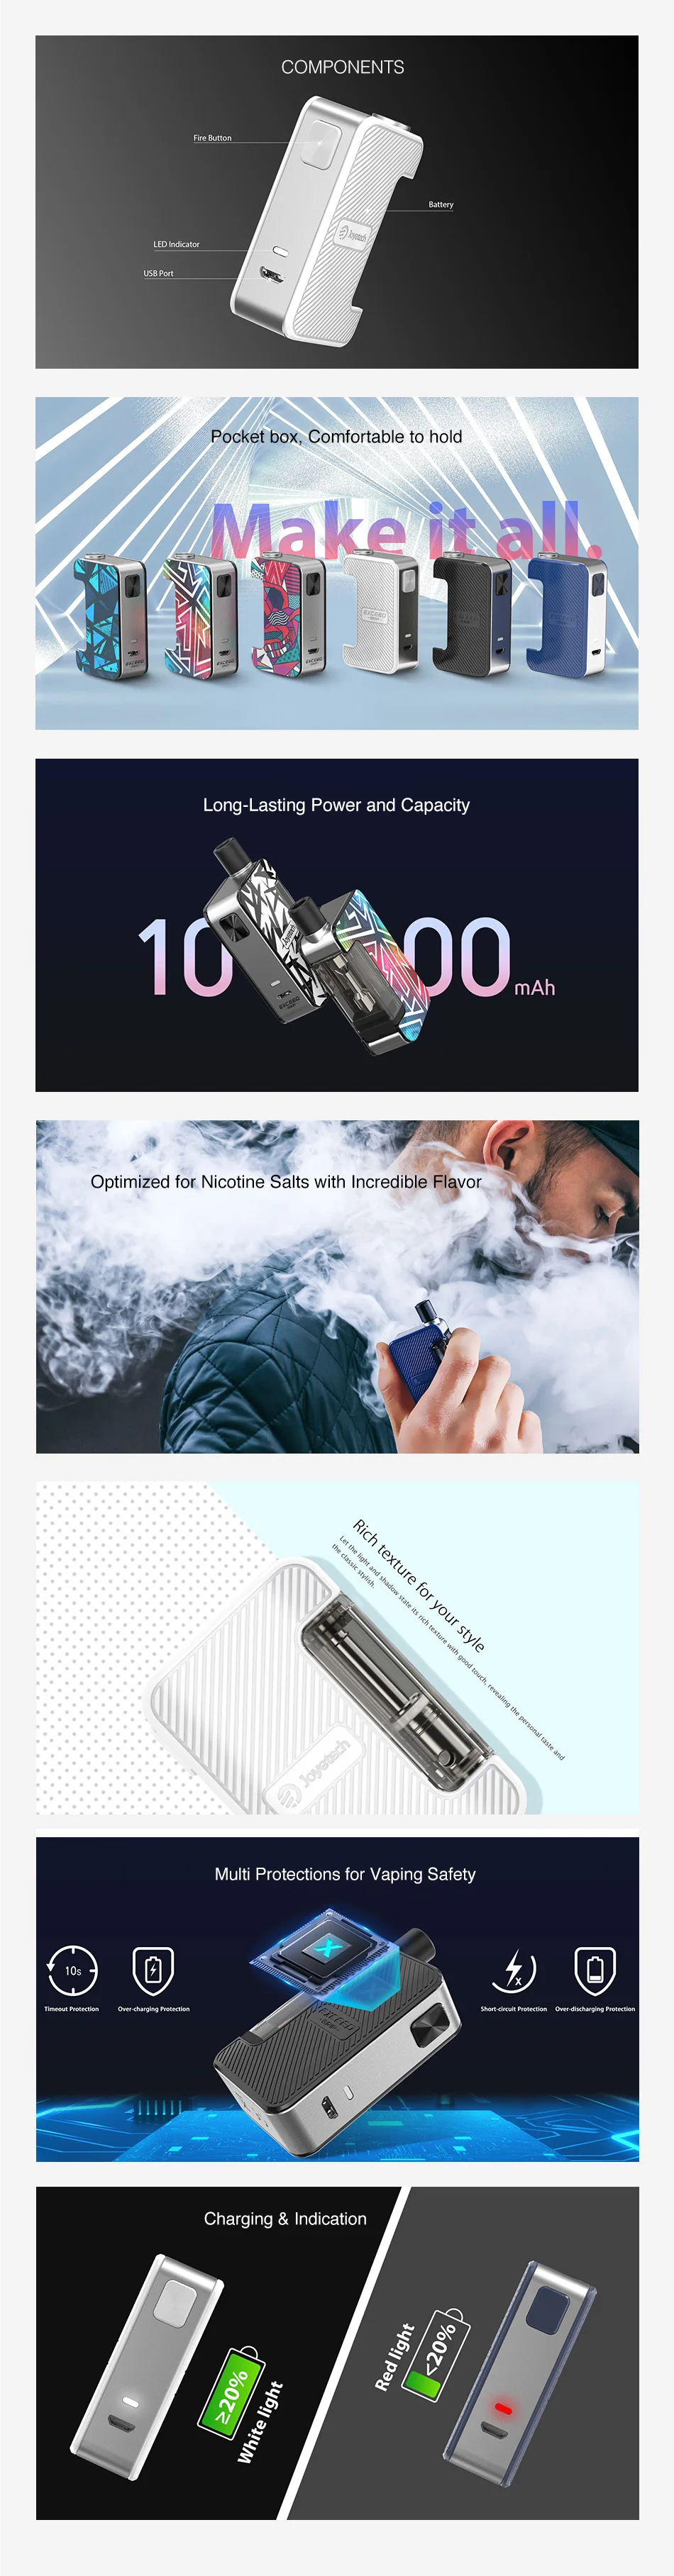 100% Original Joyetech Exceed Grip 1000mAh Built-in Battery with Intelligent Variable Voltage Output Vape vs ULTEX T80/eGo AIO